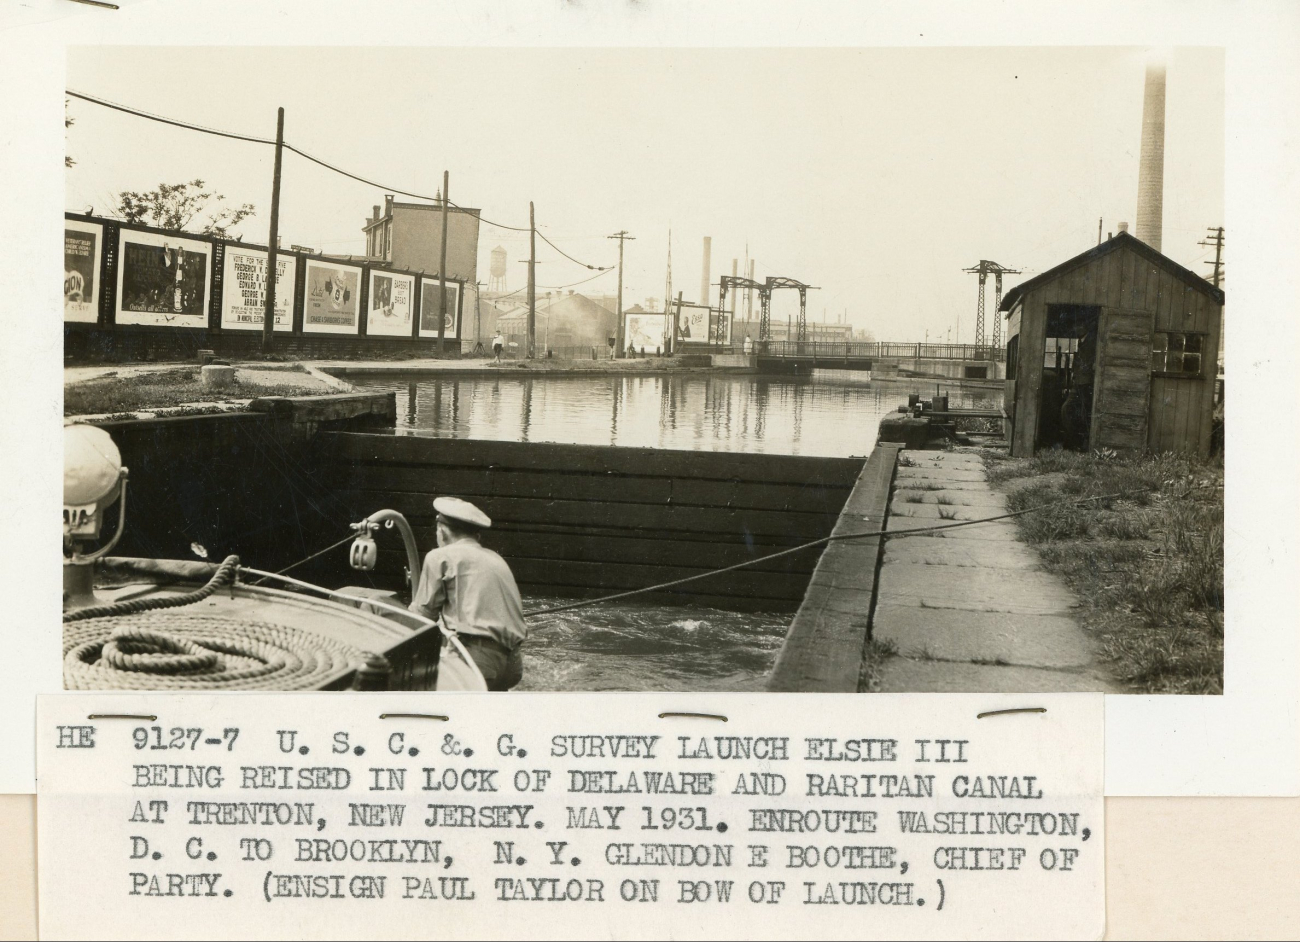 USC&GS; Survey Launch ELSIE III in lock of Delaware and Raritan Canal